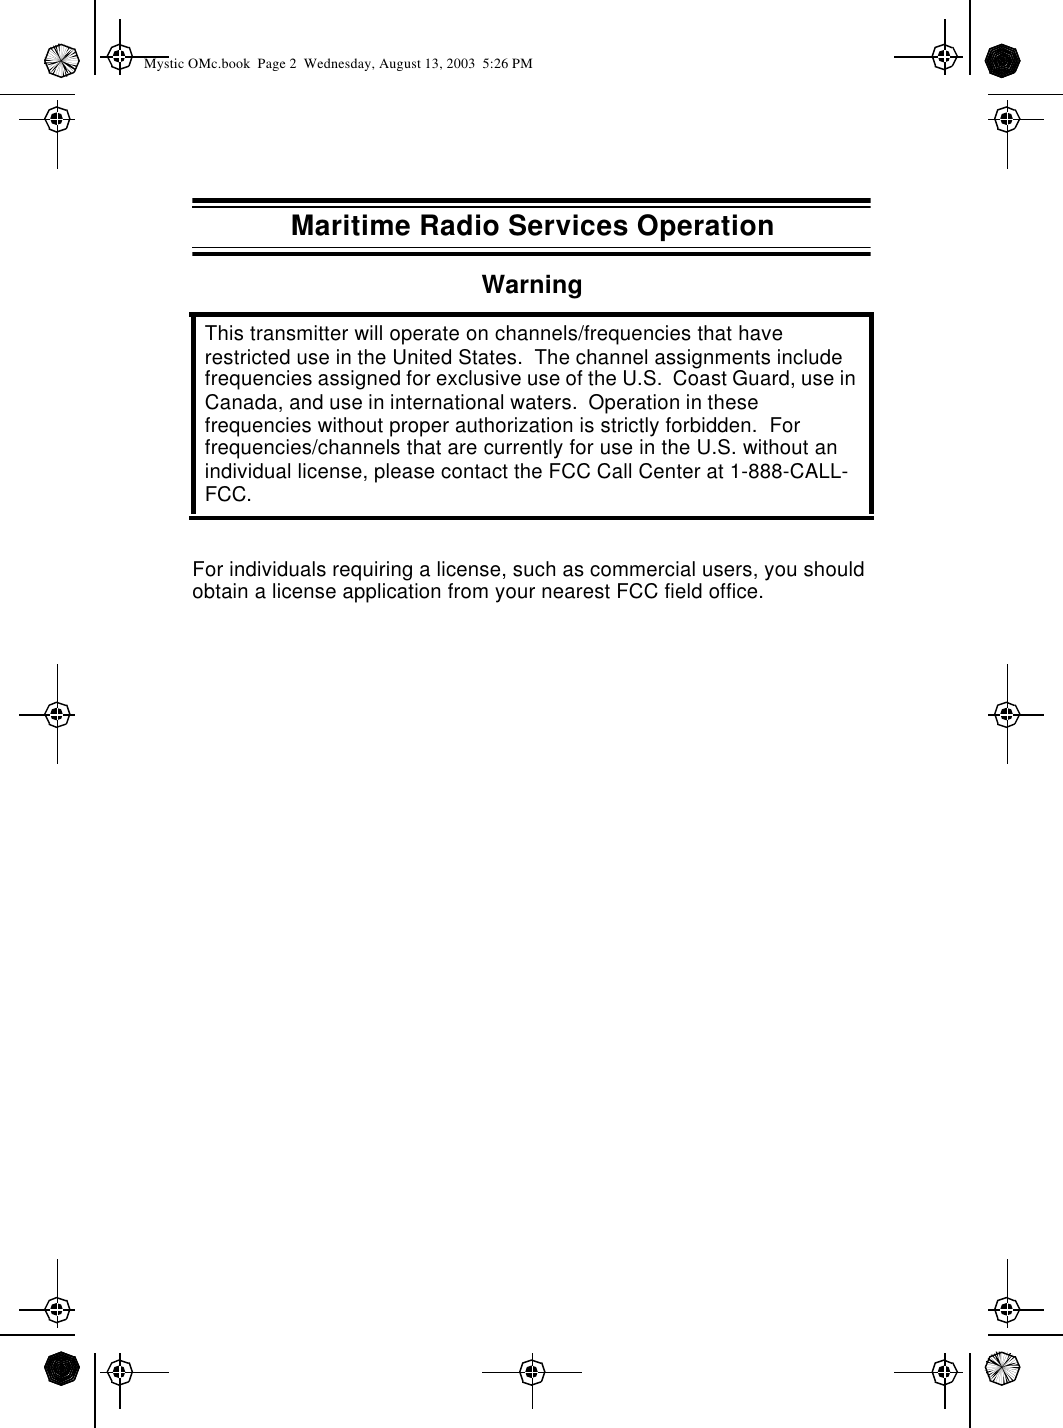 Maritime Radio Services OperationWarningFor individuals requiring a license, such as commercial users, you should obtain a license application from your nearest FCC field office.This transmitter will operate on channels/frequencies that have restricted use in the United States.  The channel assignments include frequencies assigned for exclusive use of the U.S.  Coast Guard, use in Canada, and use in international waters.  Operation in these frequencies without proper authorization is strictly forbidden.  For frequencies/channels that are currently for use in the U.S. without an individual license, please contact the FCC Call Center at 1-888-CALL-FCC.Mystic OMc.book  Page 2  Wednesday, August 13, 2003  5:26 PM